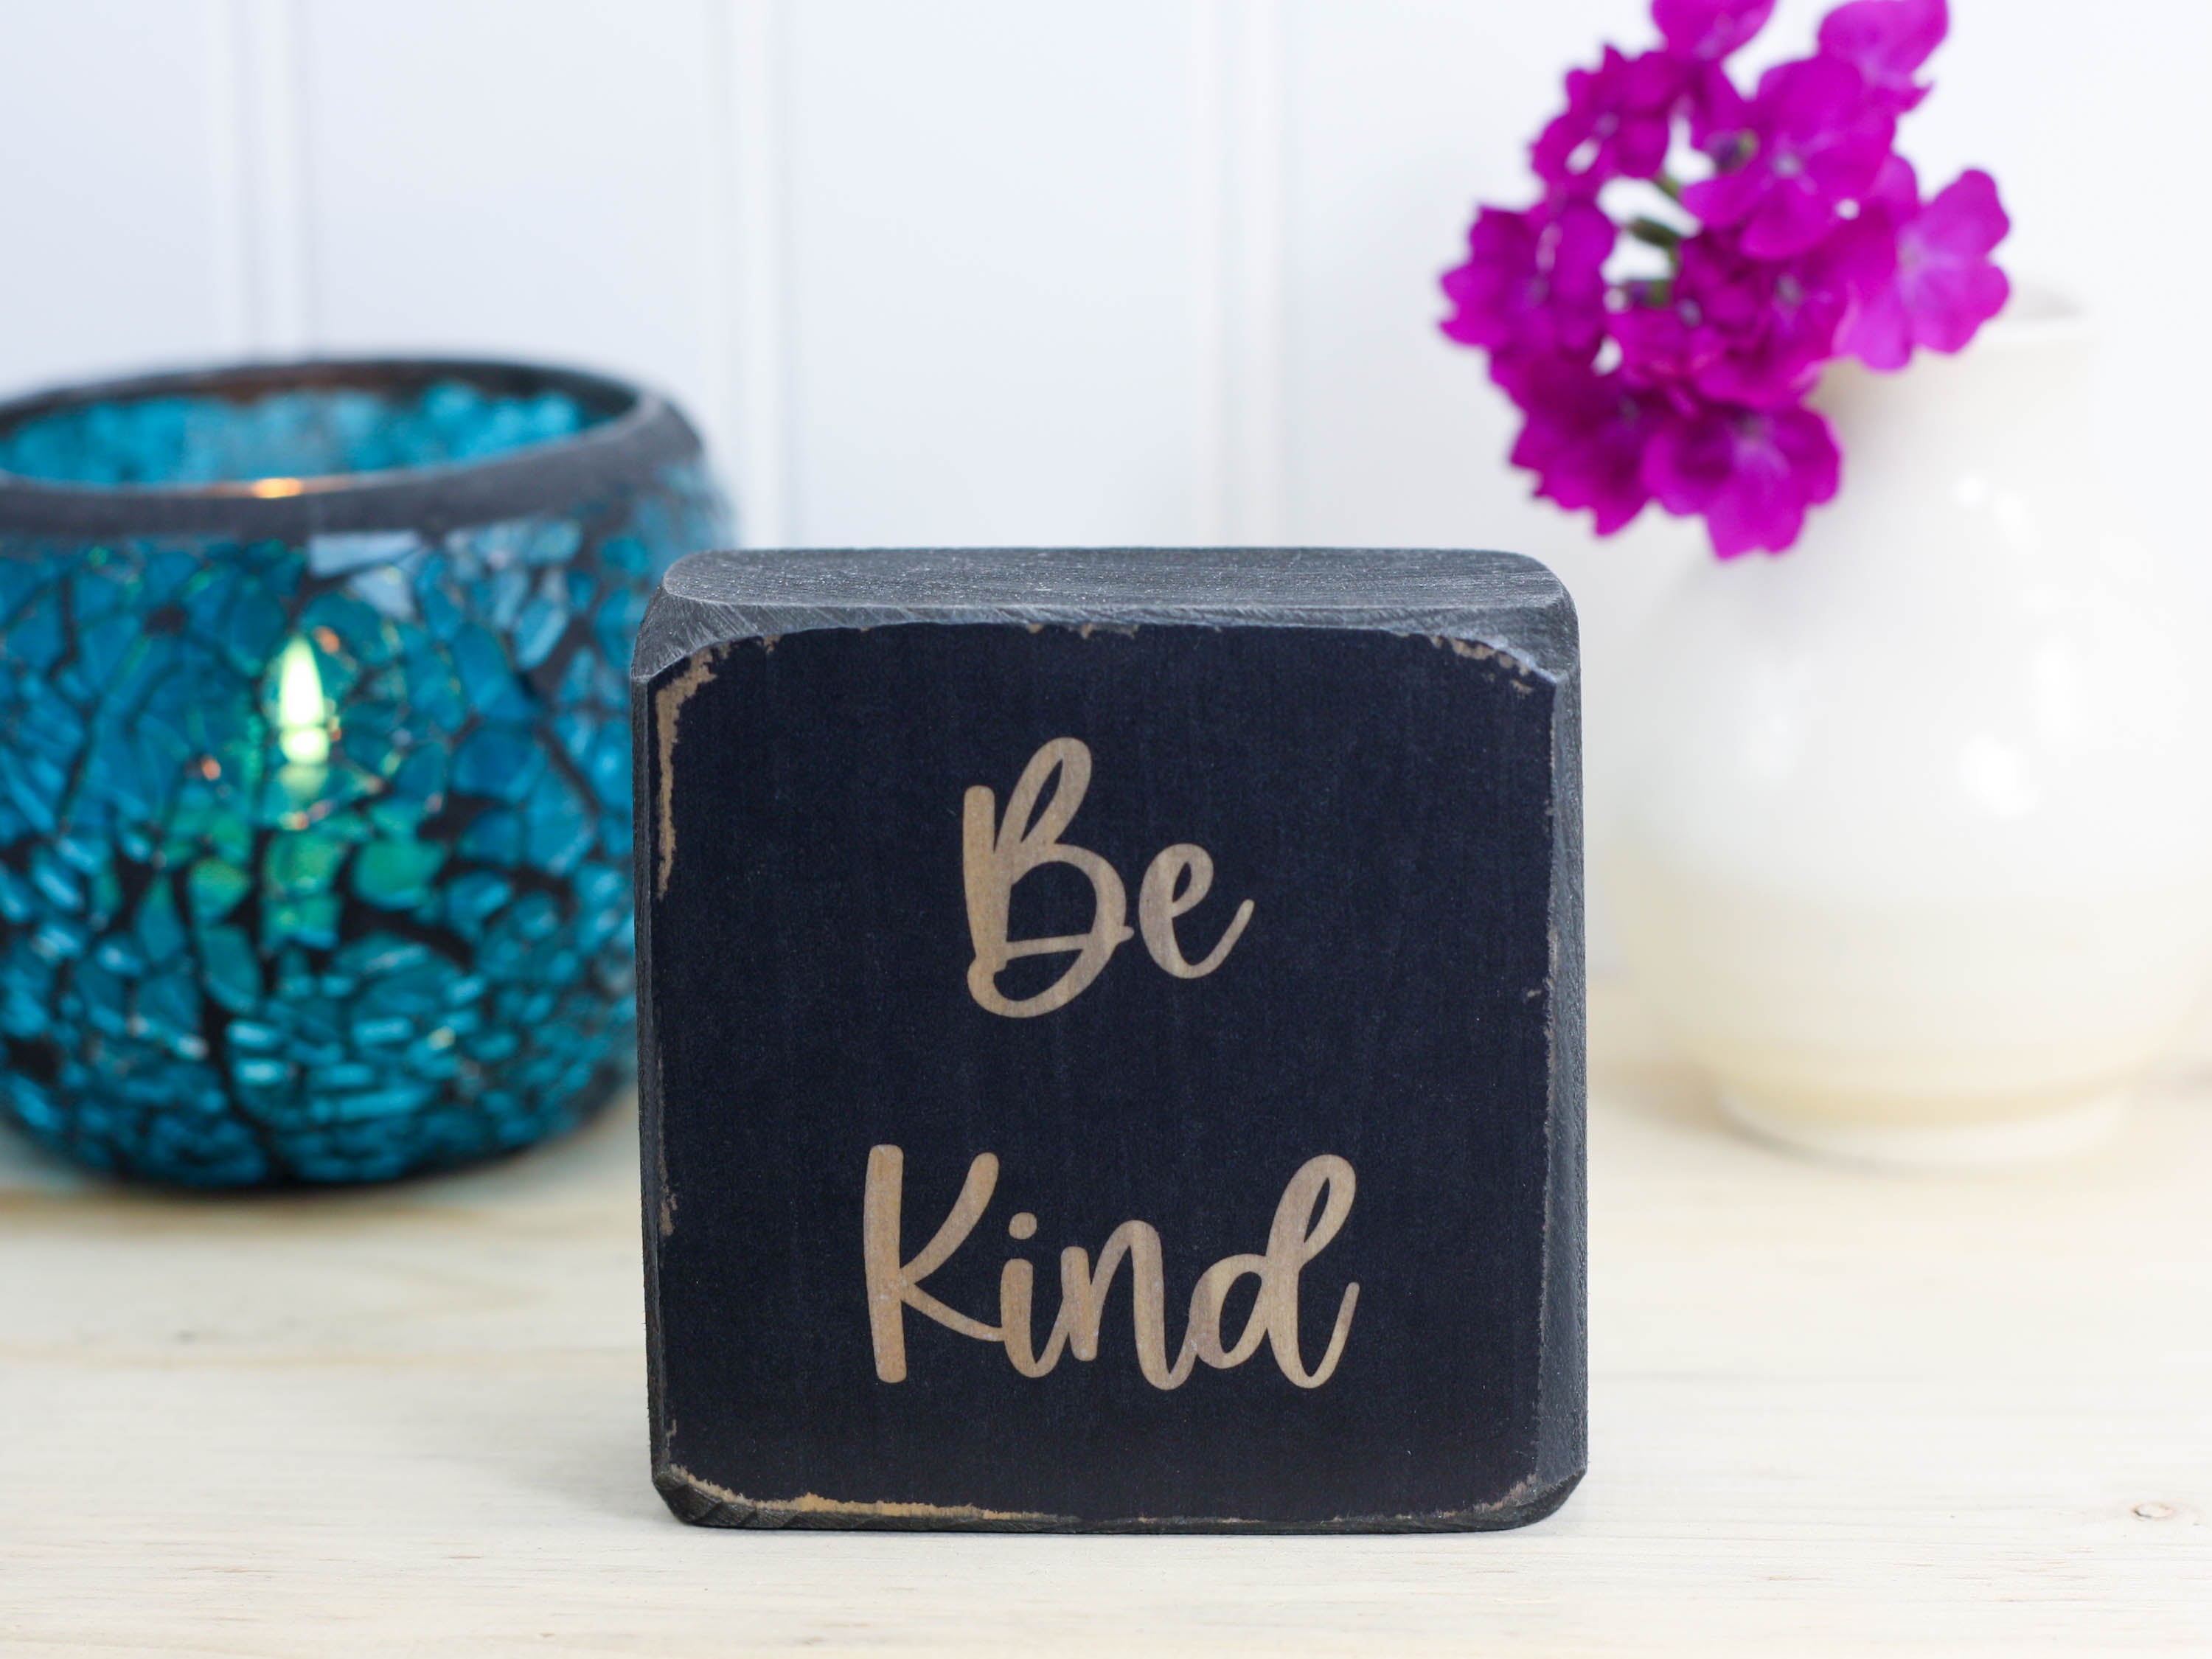 distressed black small wood sign with the text "be kind"